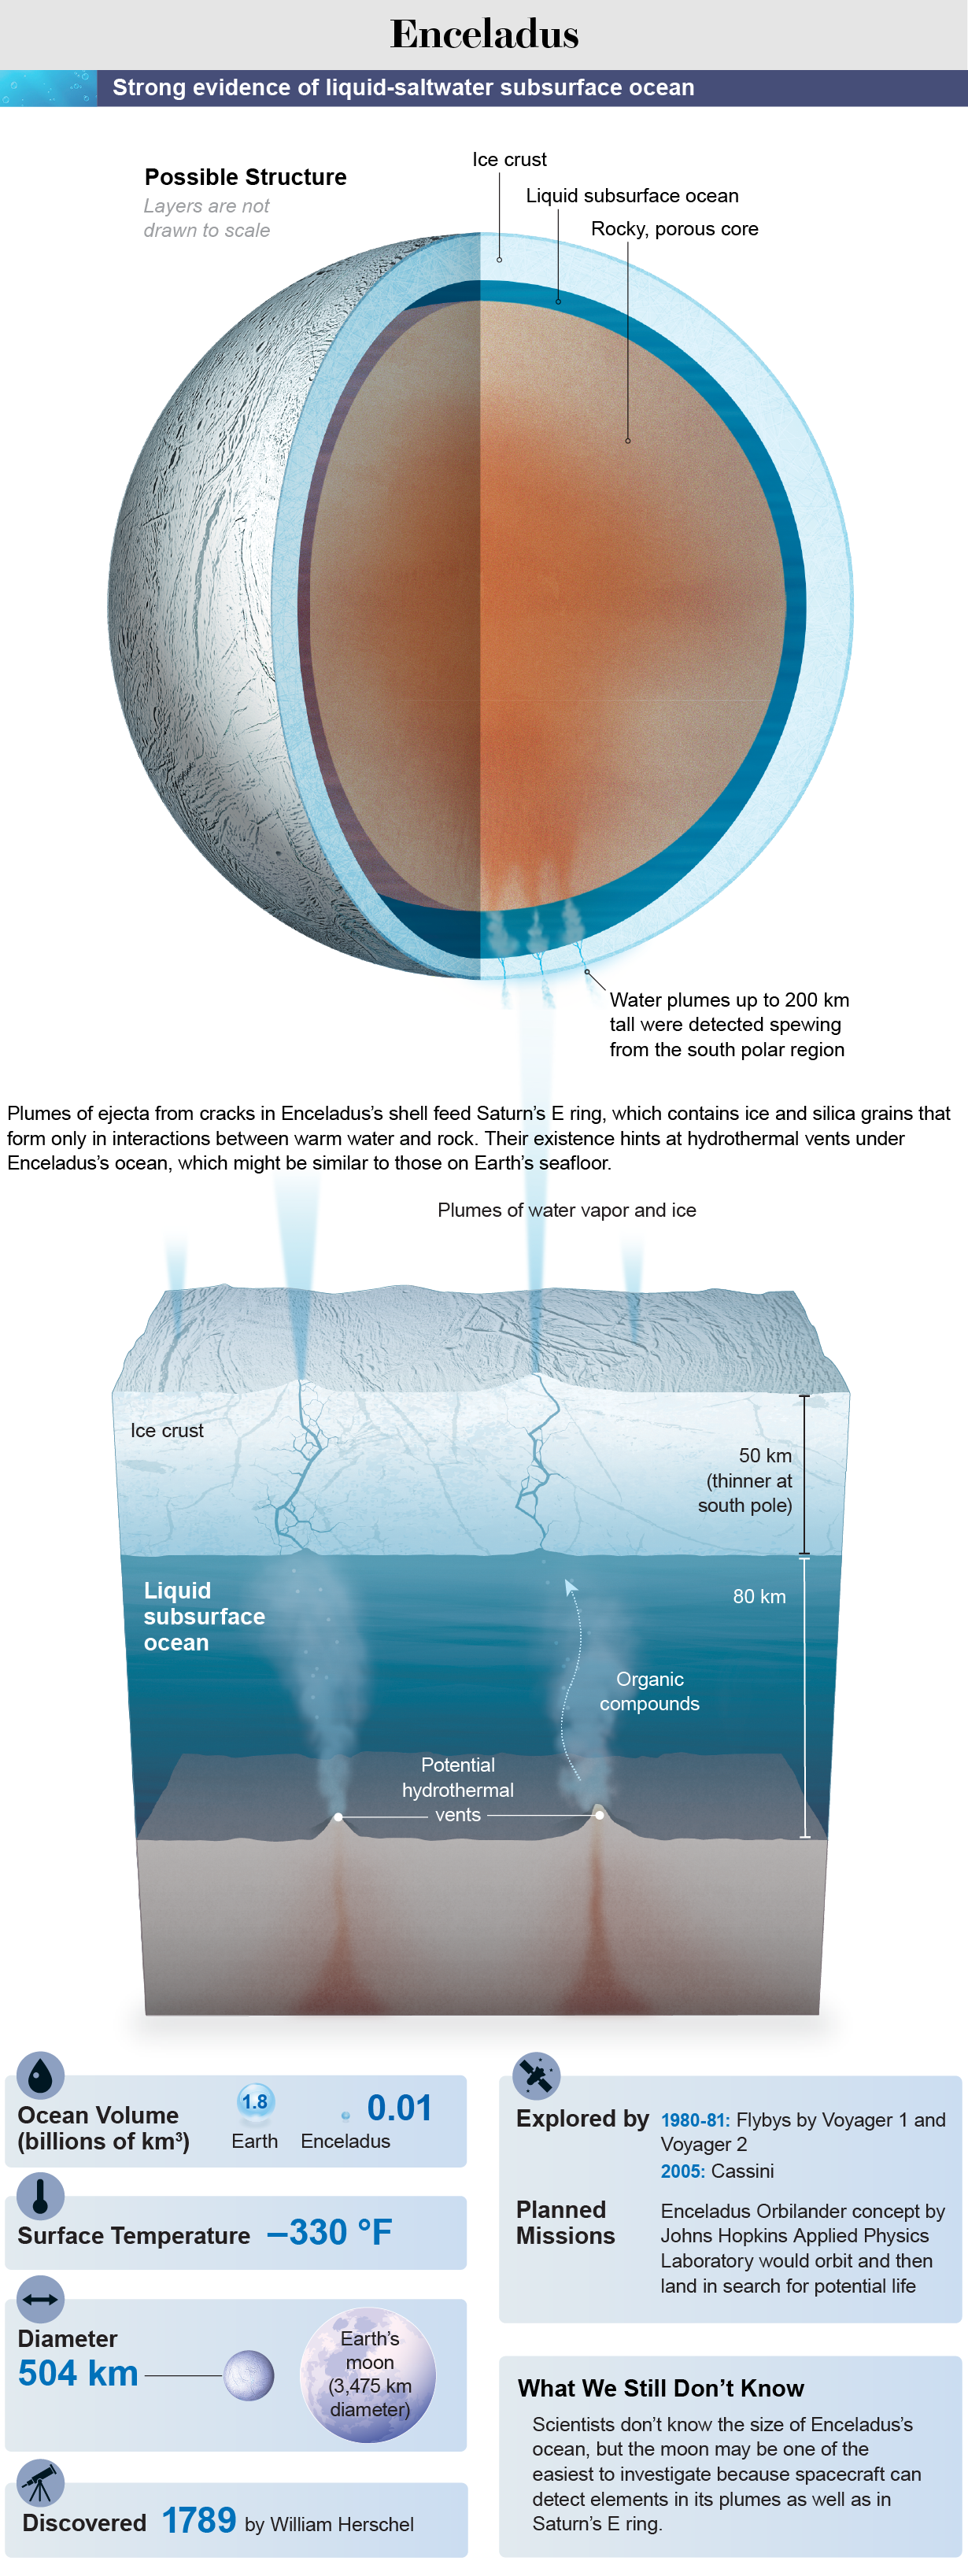 View inside Enceladus—showing a rocky, porous core, liquid subsurface ocean, and ice crust—paired with a cross section of the ocean and moon statistics.